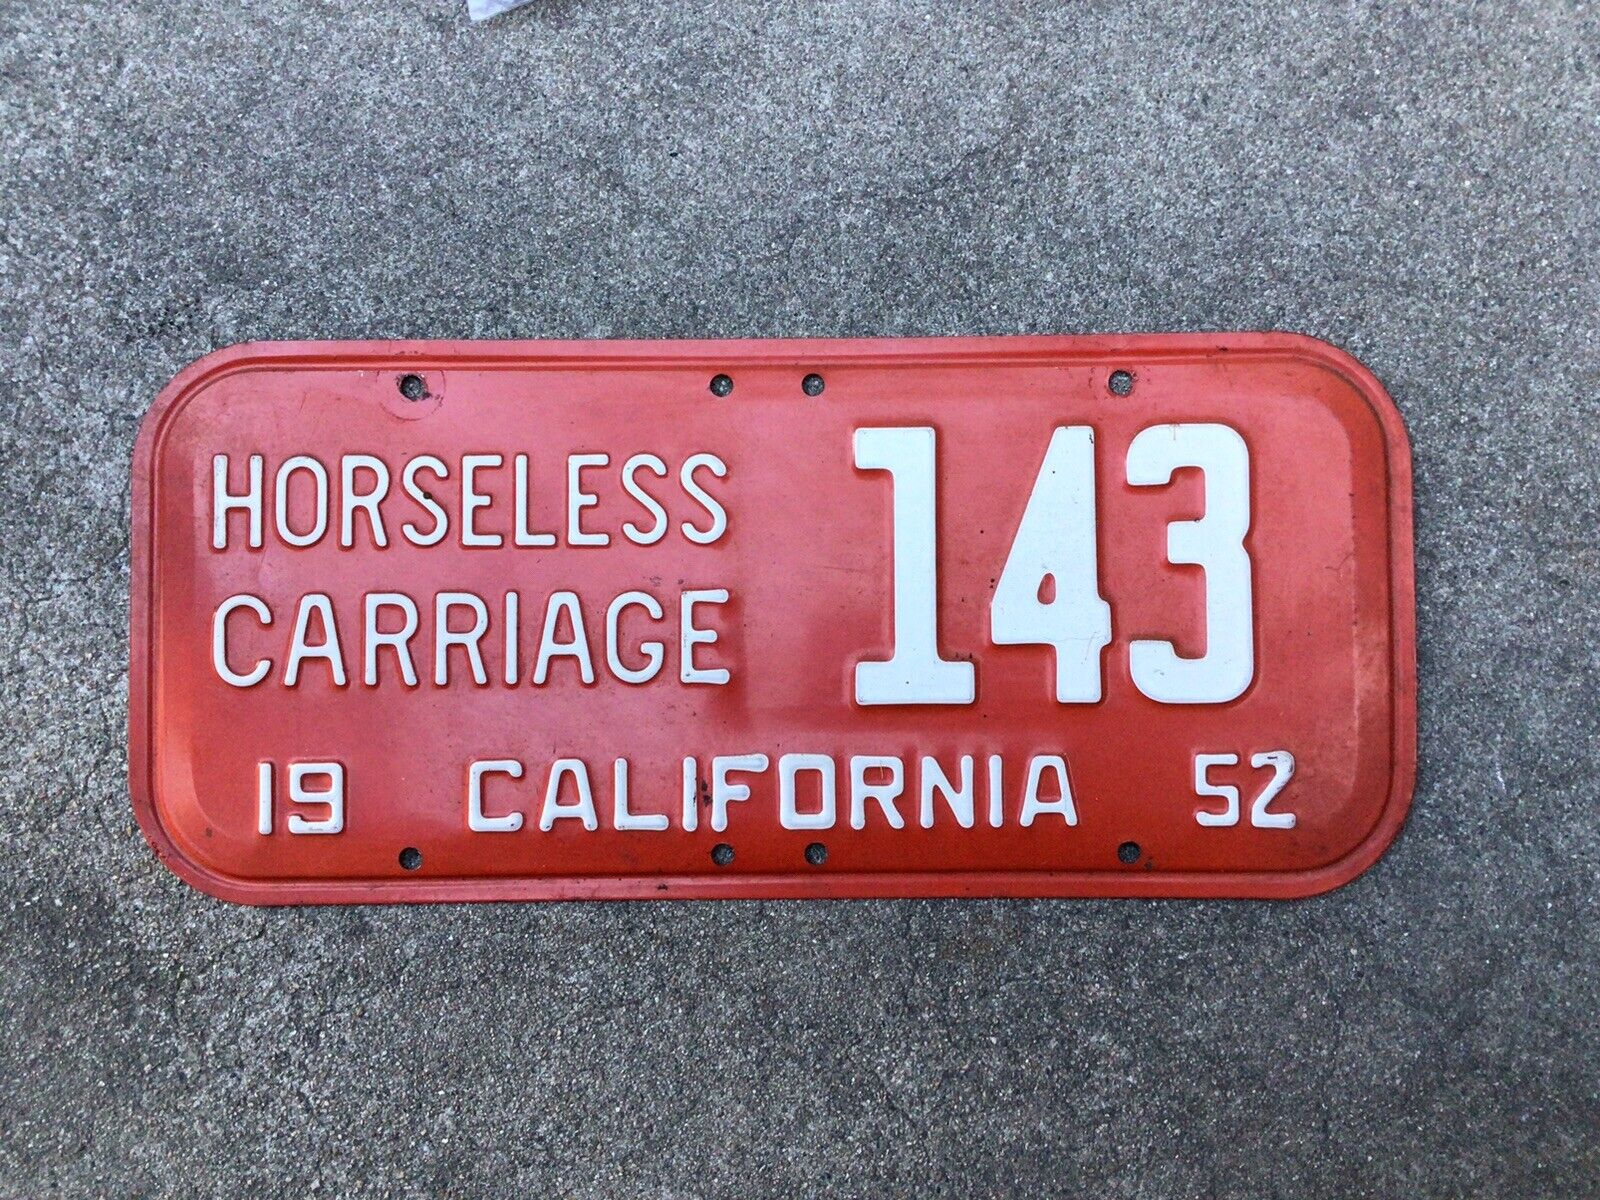 1952 - CALIFORNIA - HORSELESS CARRIAGE - LICENSE PLATE